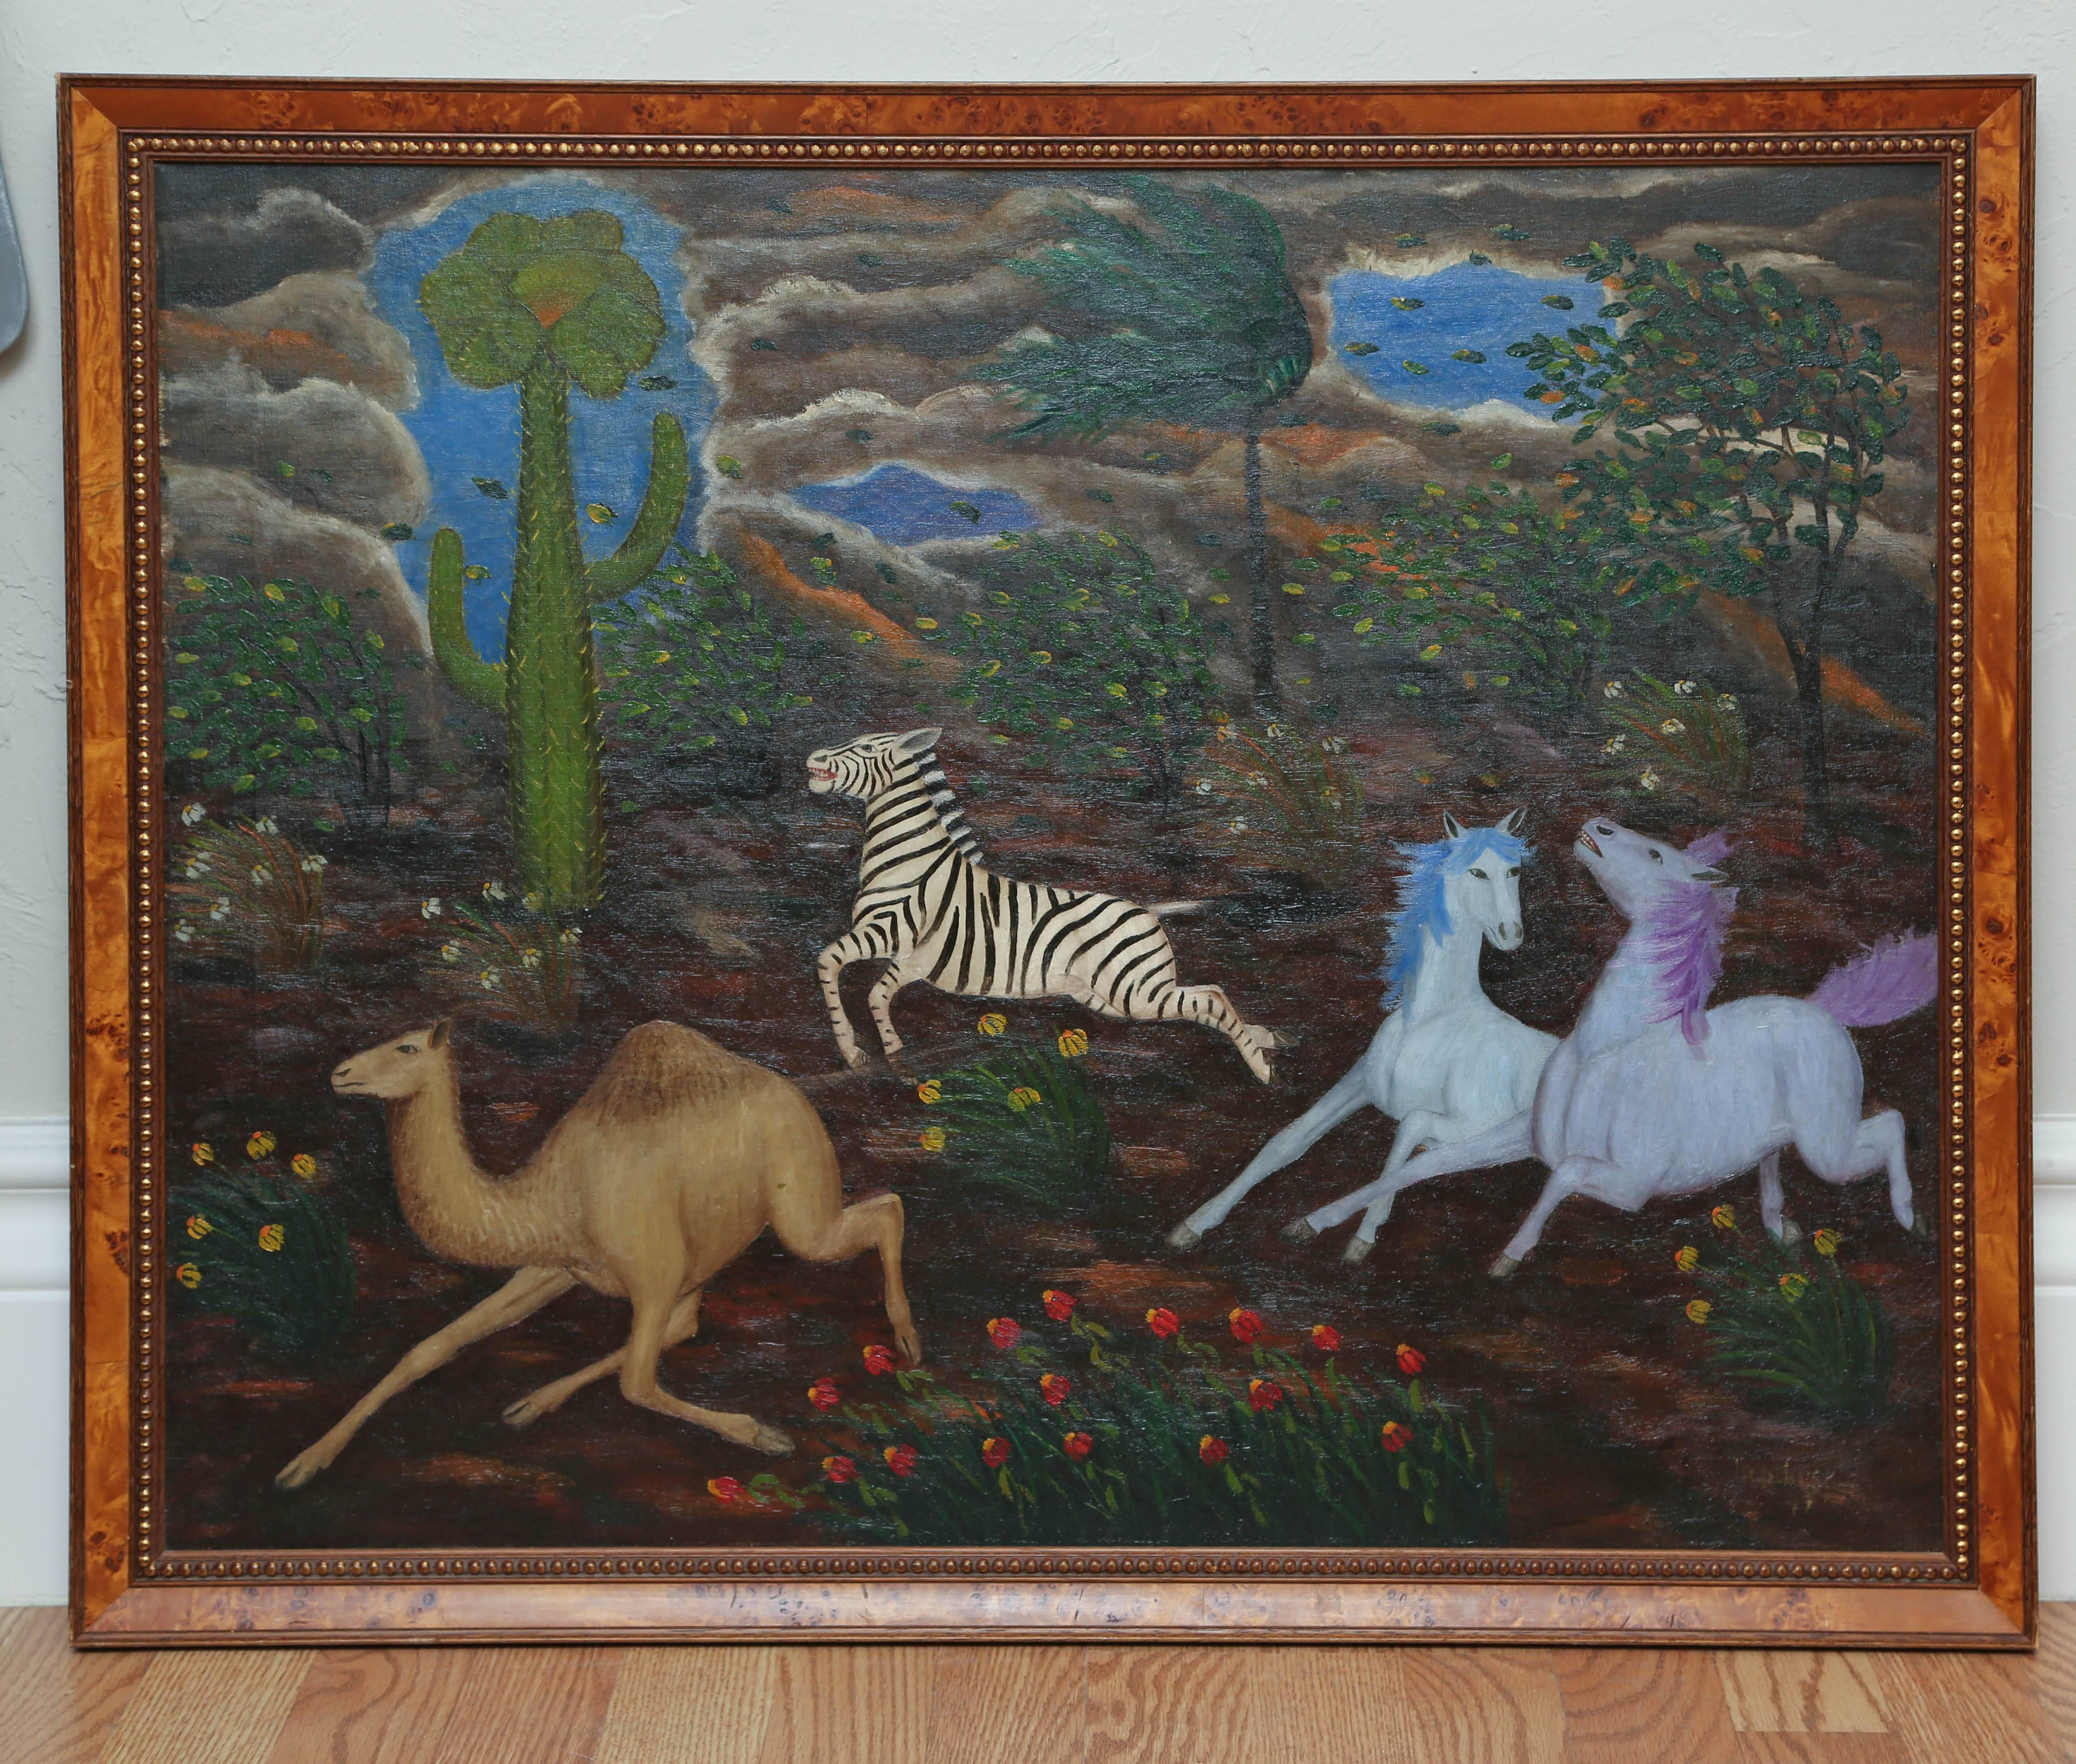 Striking original oil of horses, zebra and camel running in the wind.
Canvas size 24